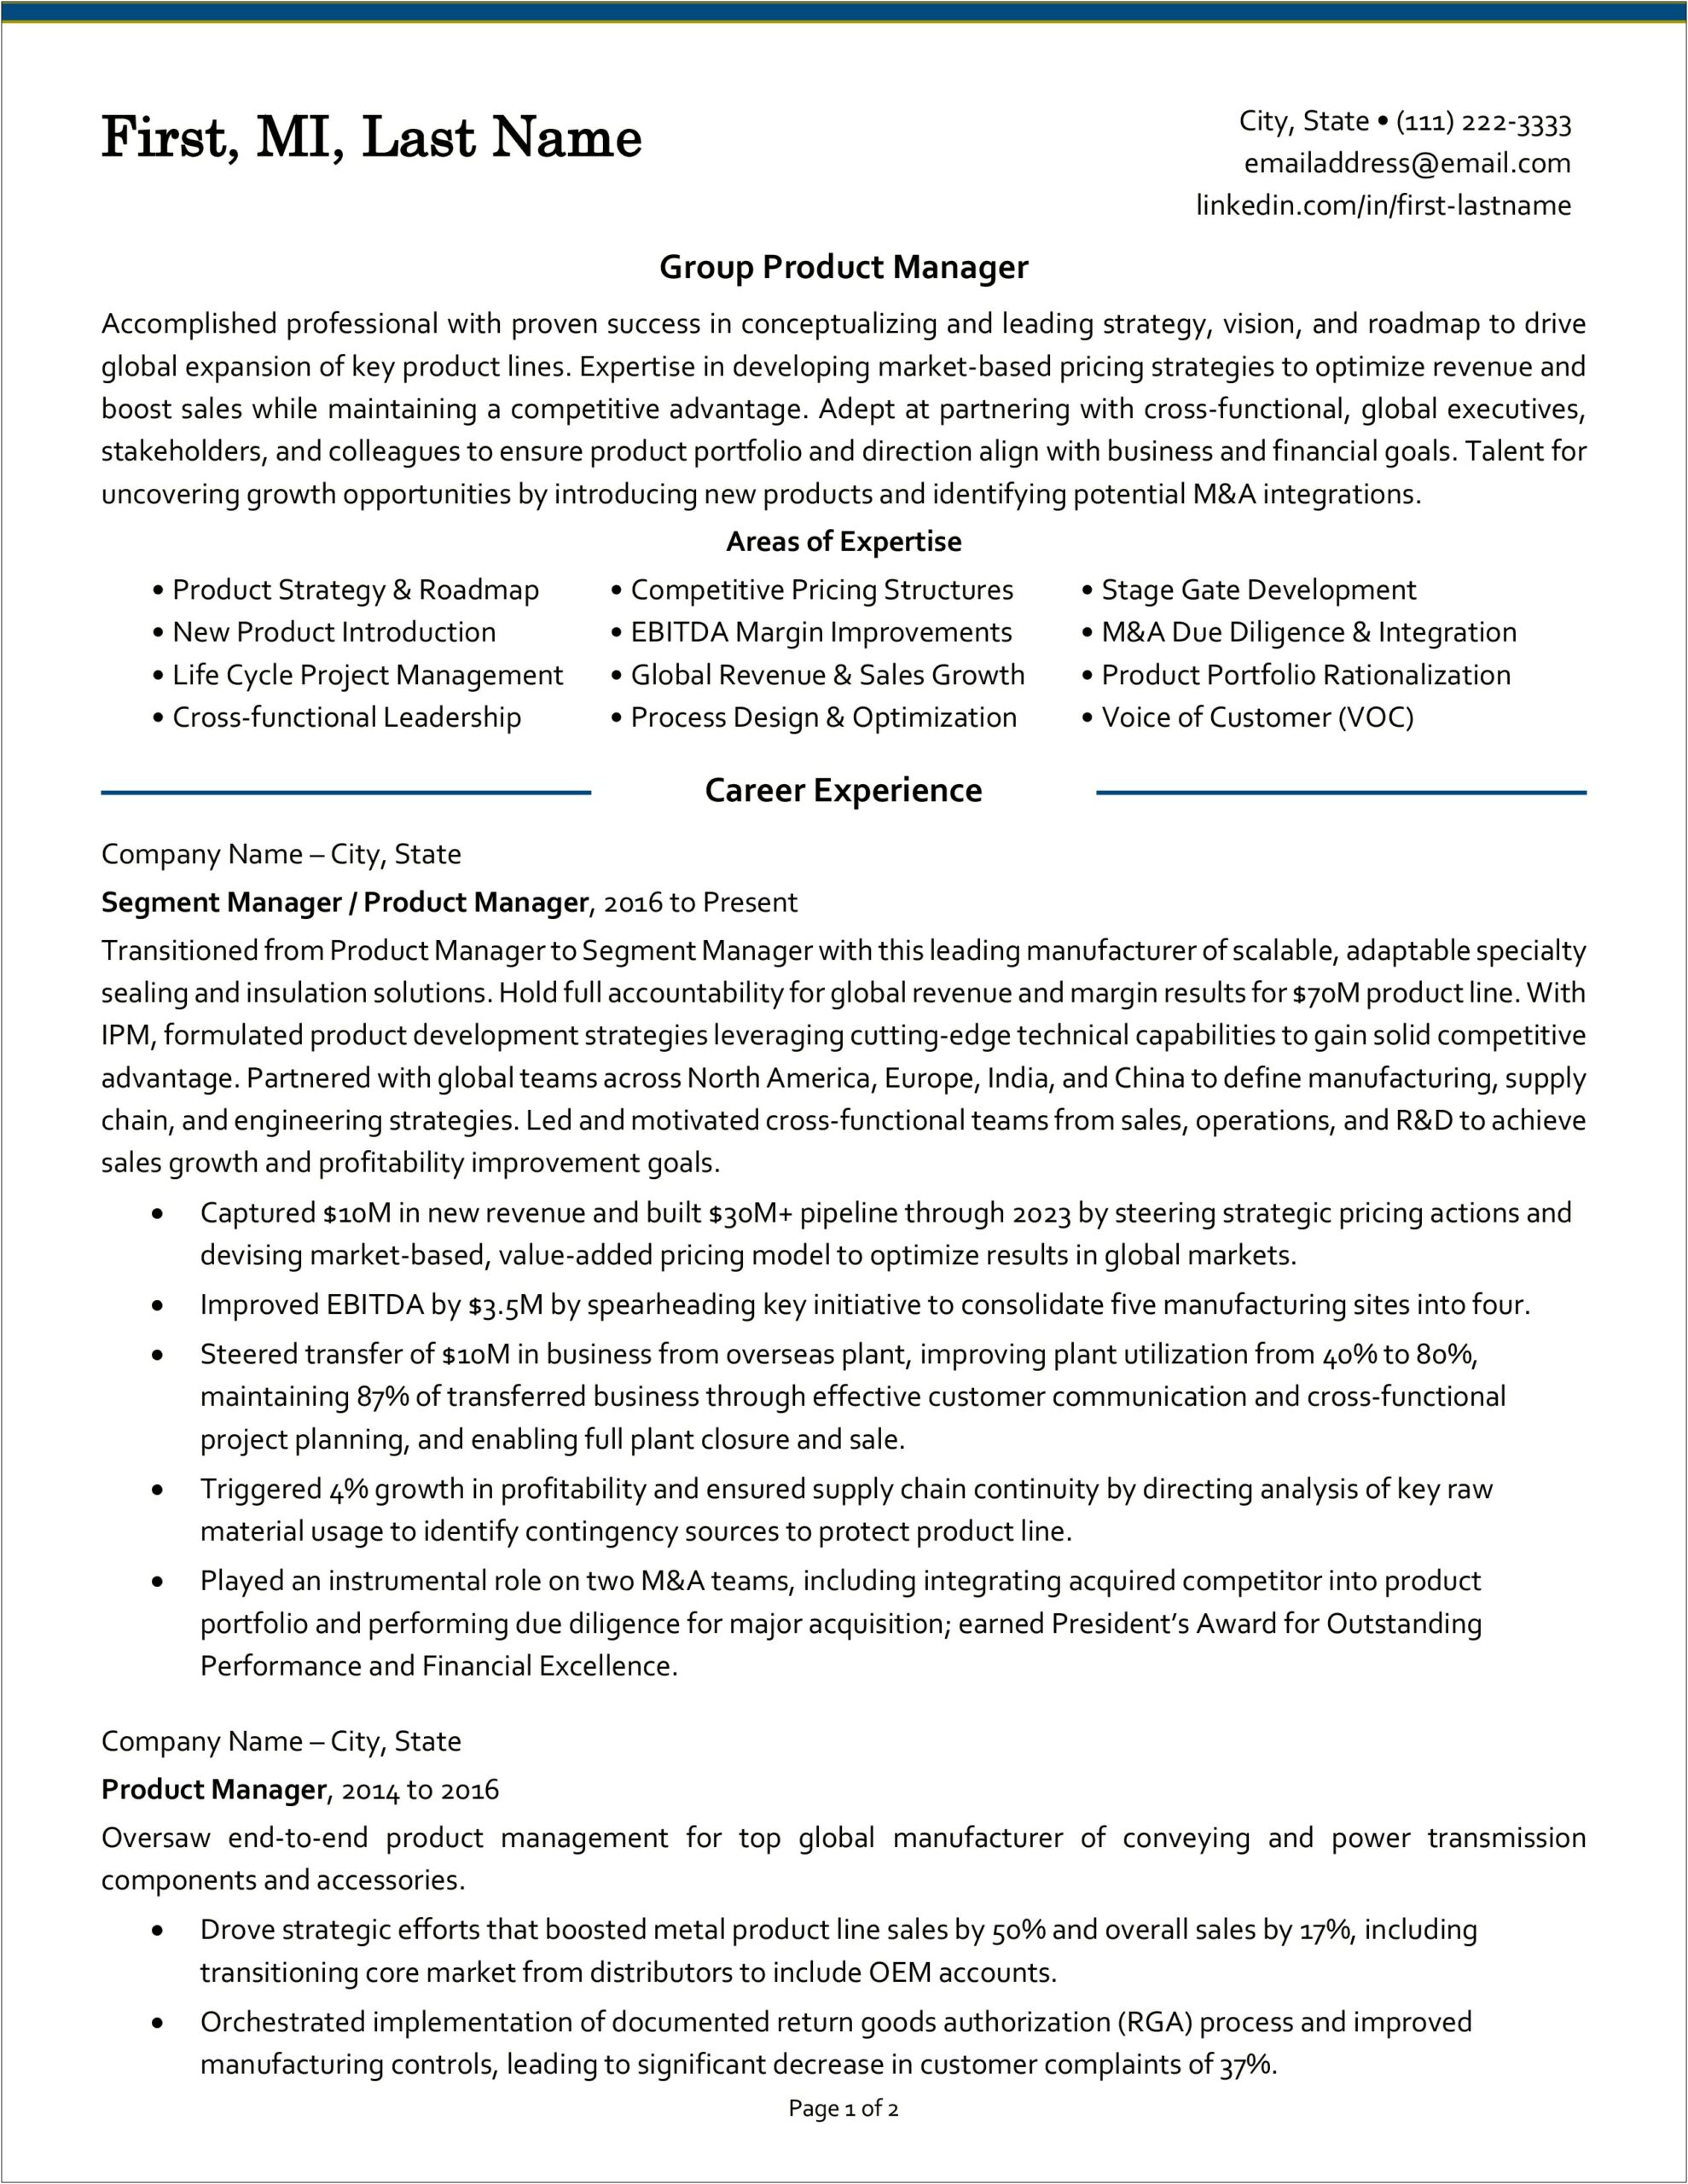 Sample Perfect One Page Resume